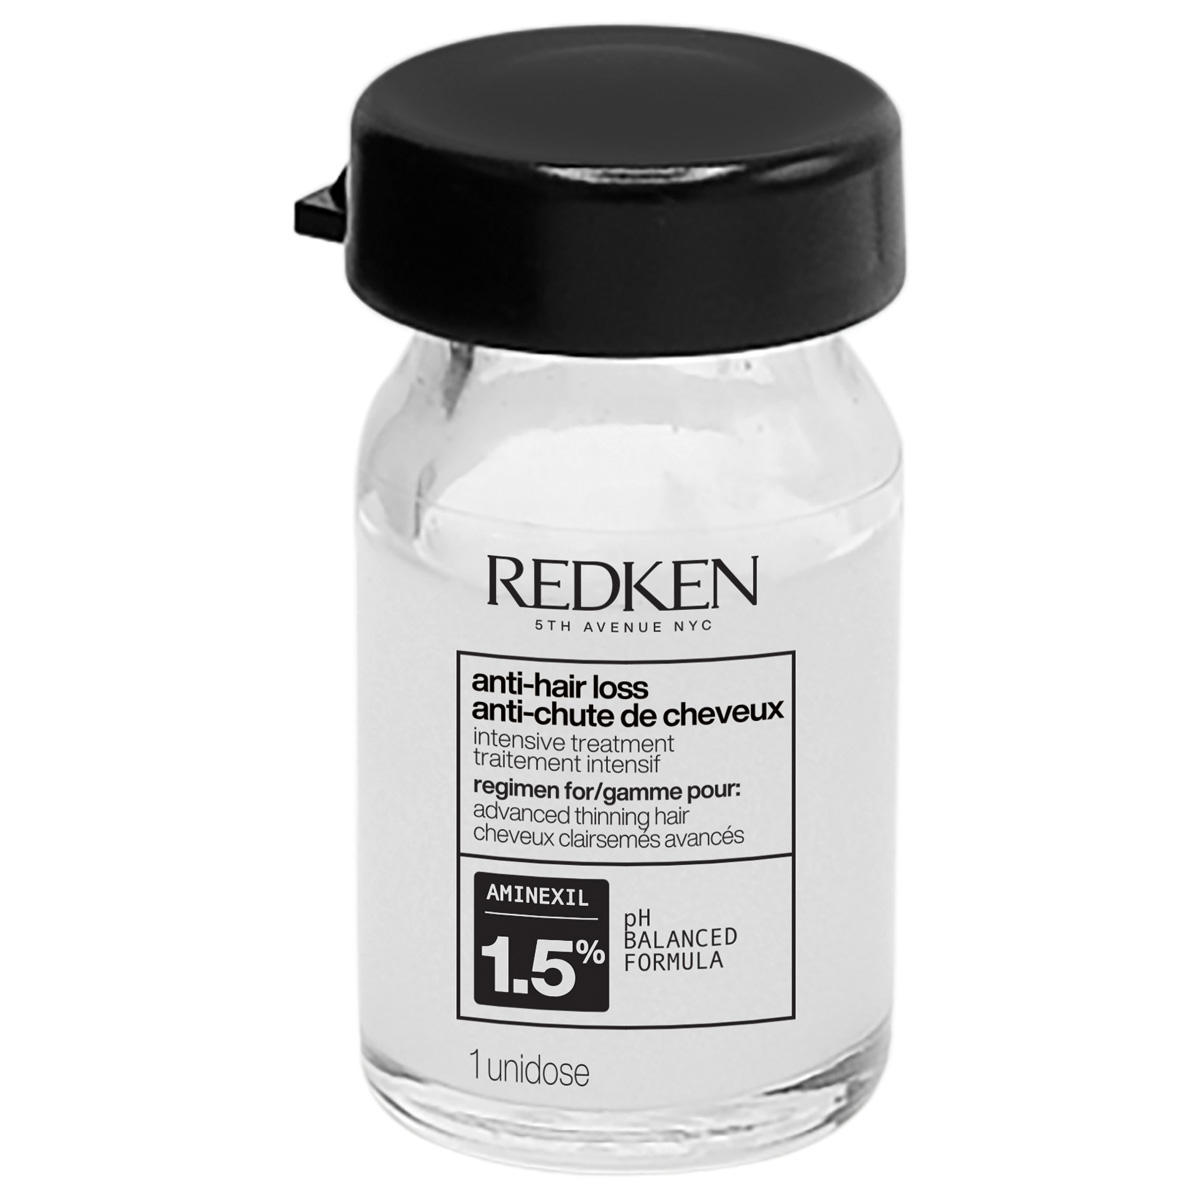 Redken cerafill maximize anti-hair loss intensive treatment Package with 10 x 6 ml - 2